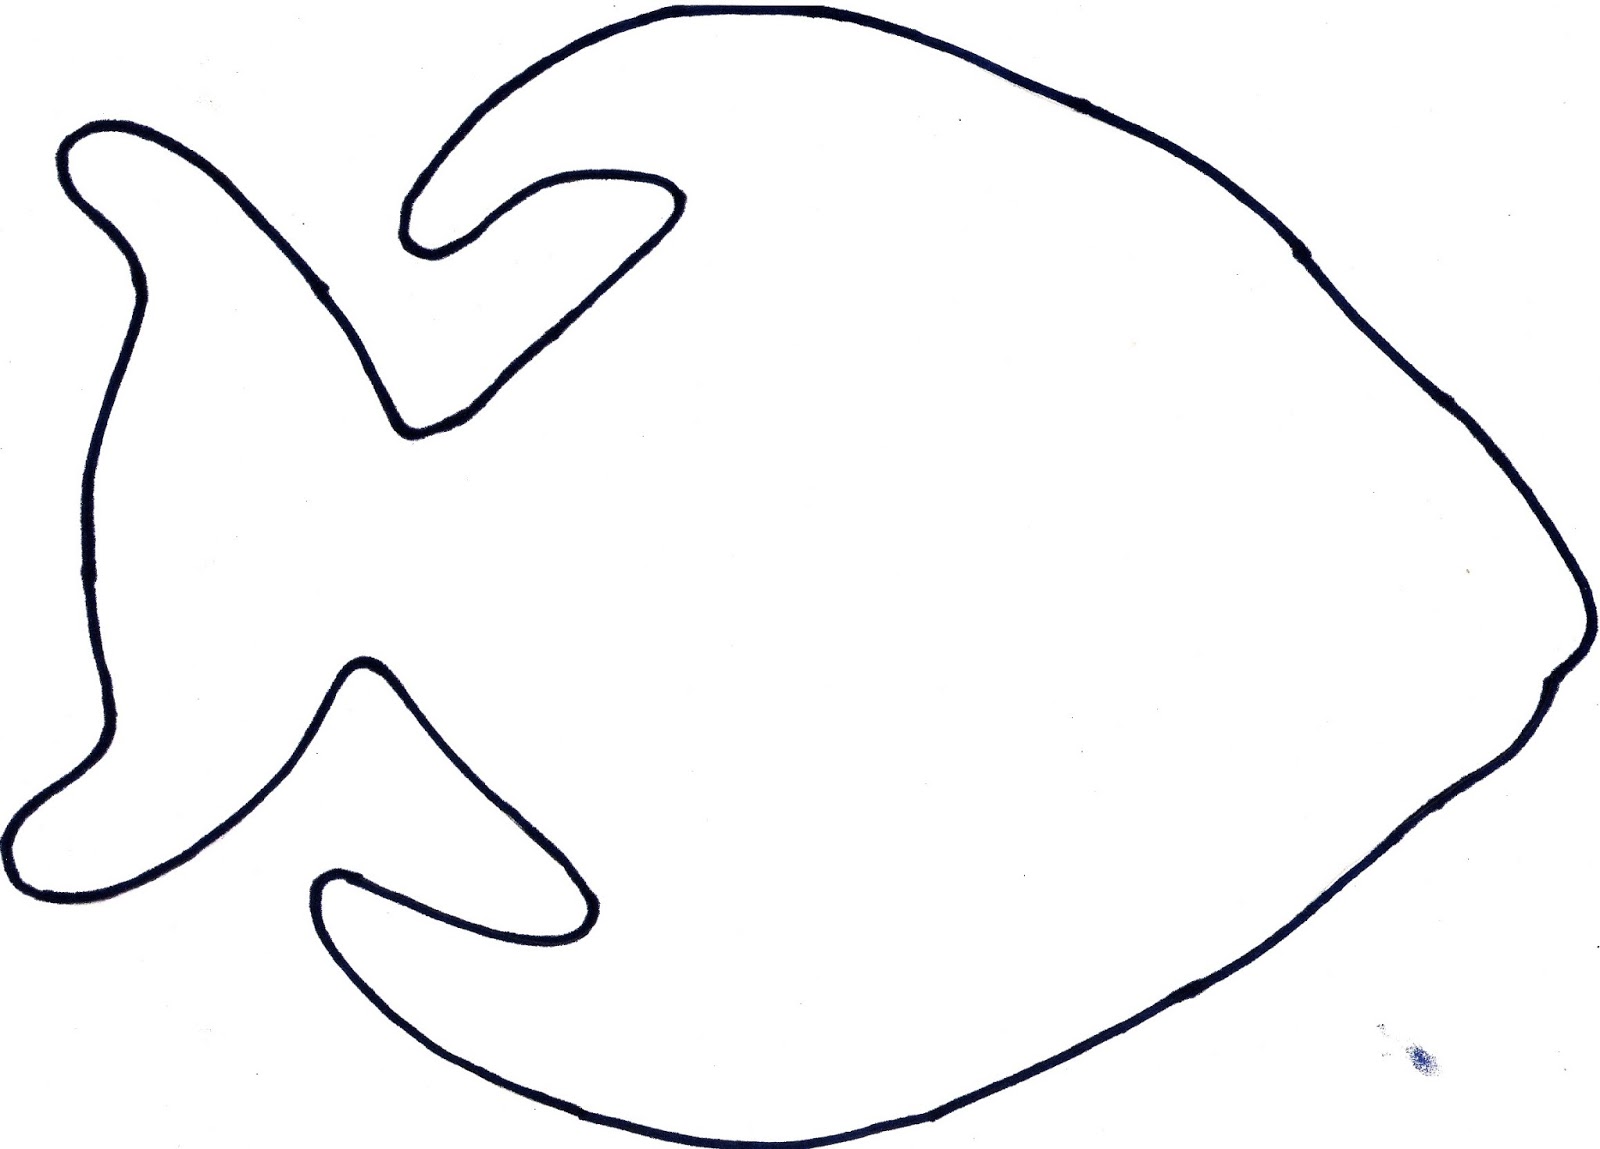 free-fish-shape-cliparts-download-free-fish-shape-cliparts-png-images